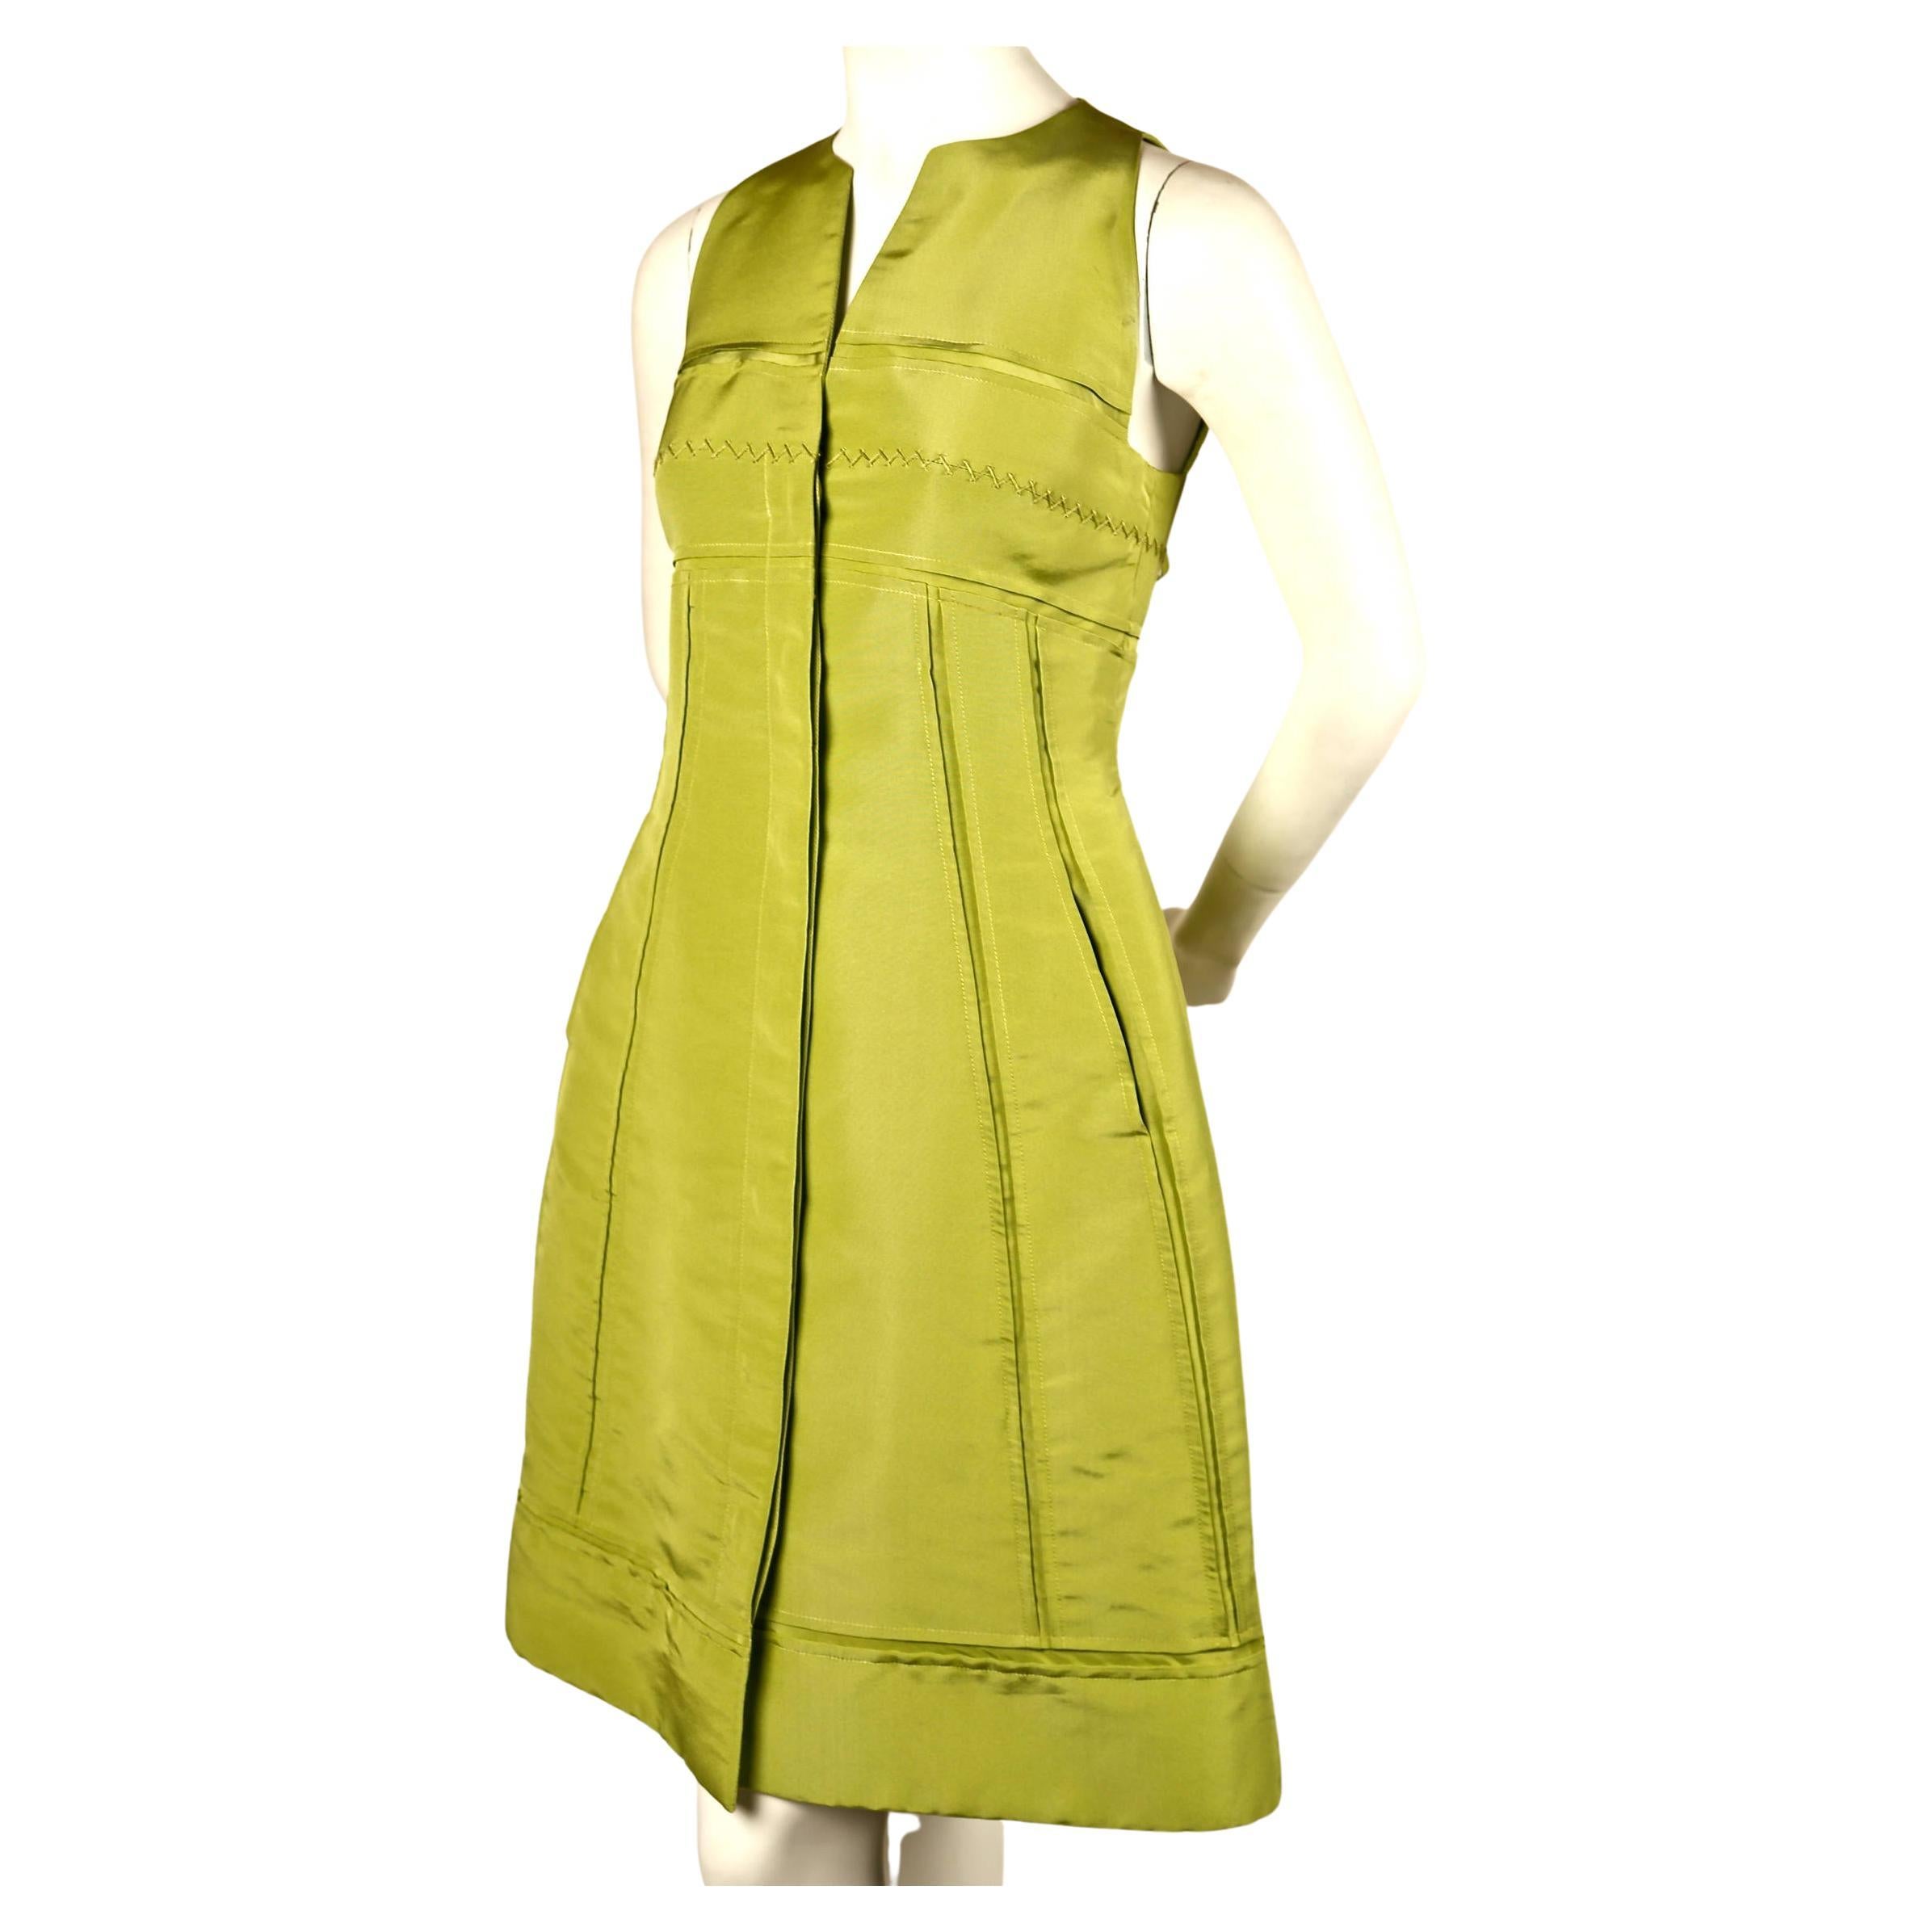 Chartreuse silk runway dress from Chado Ralph Rucci as seen on the runway for spring 2009. Best fits a US 2 or 4. Approximate measurements: bust 32